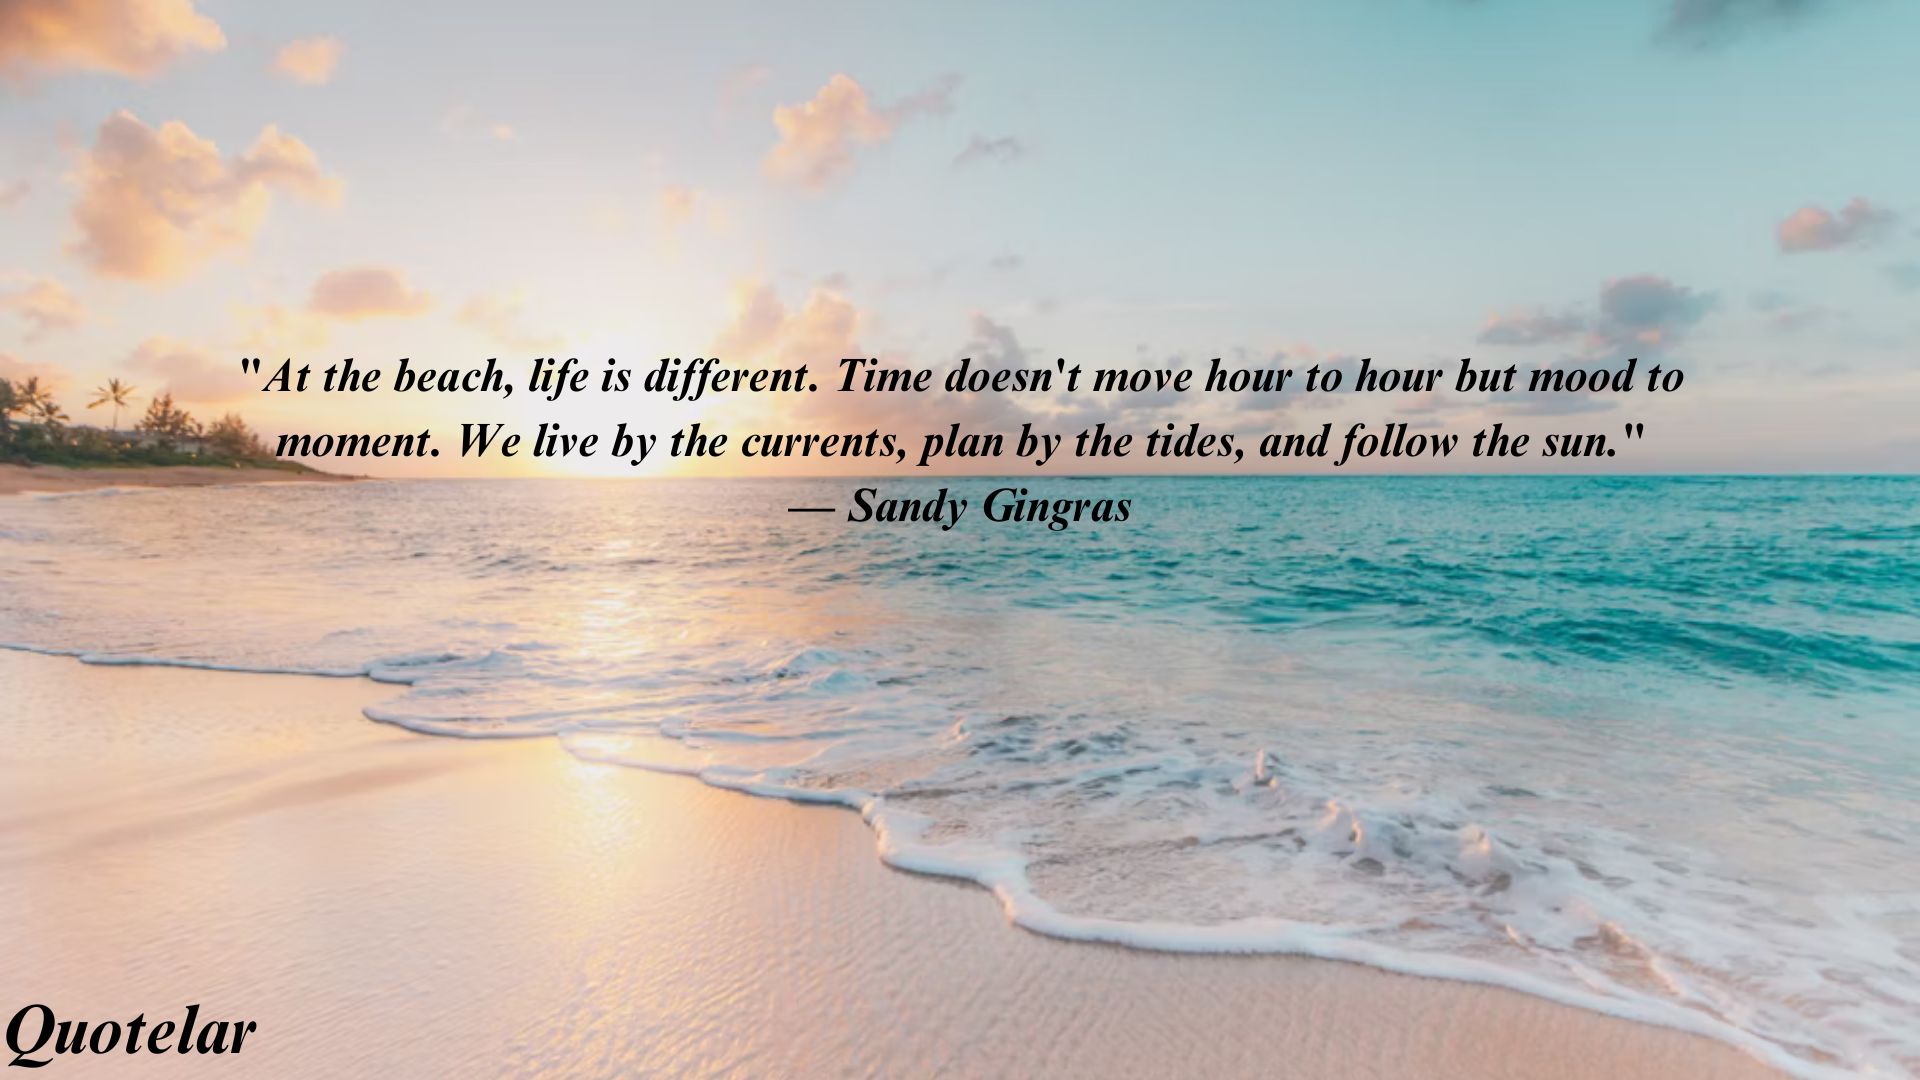 Top 10 Quotes of Beach